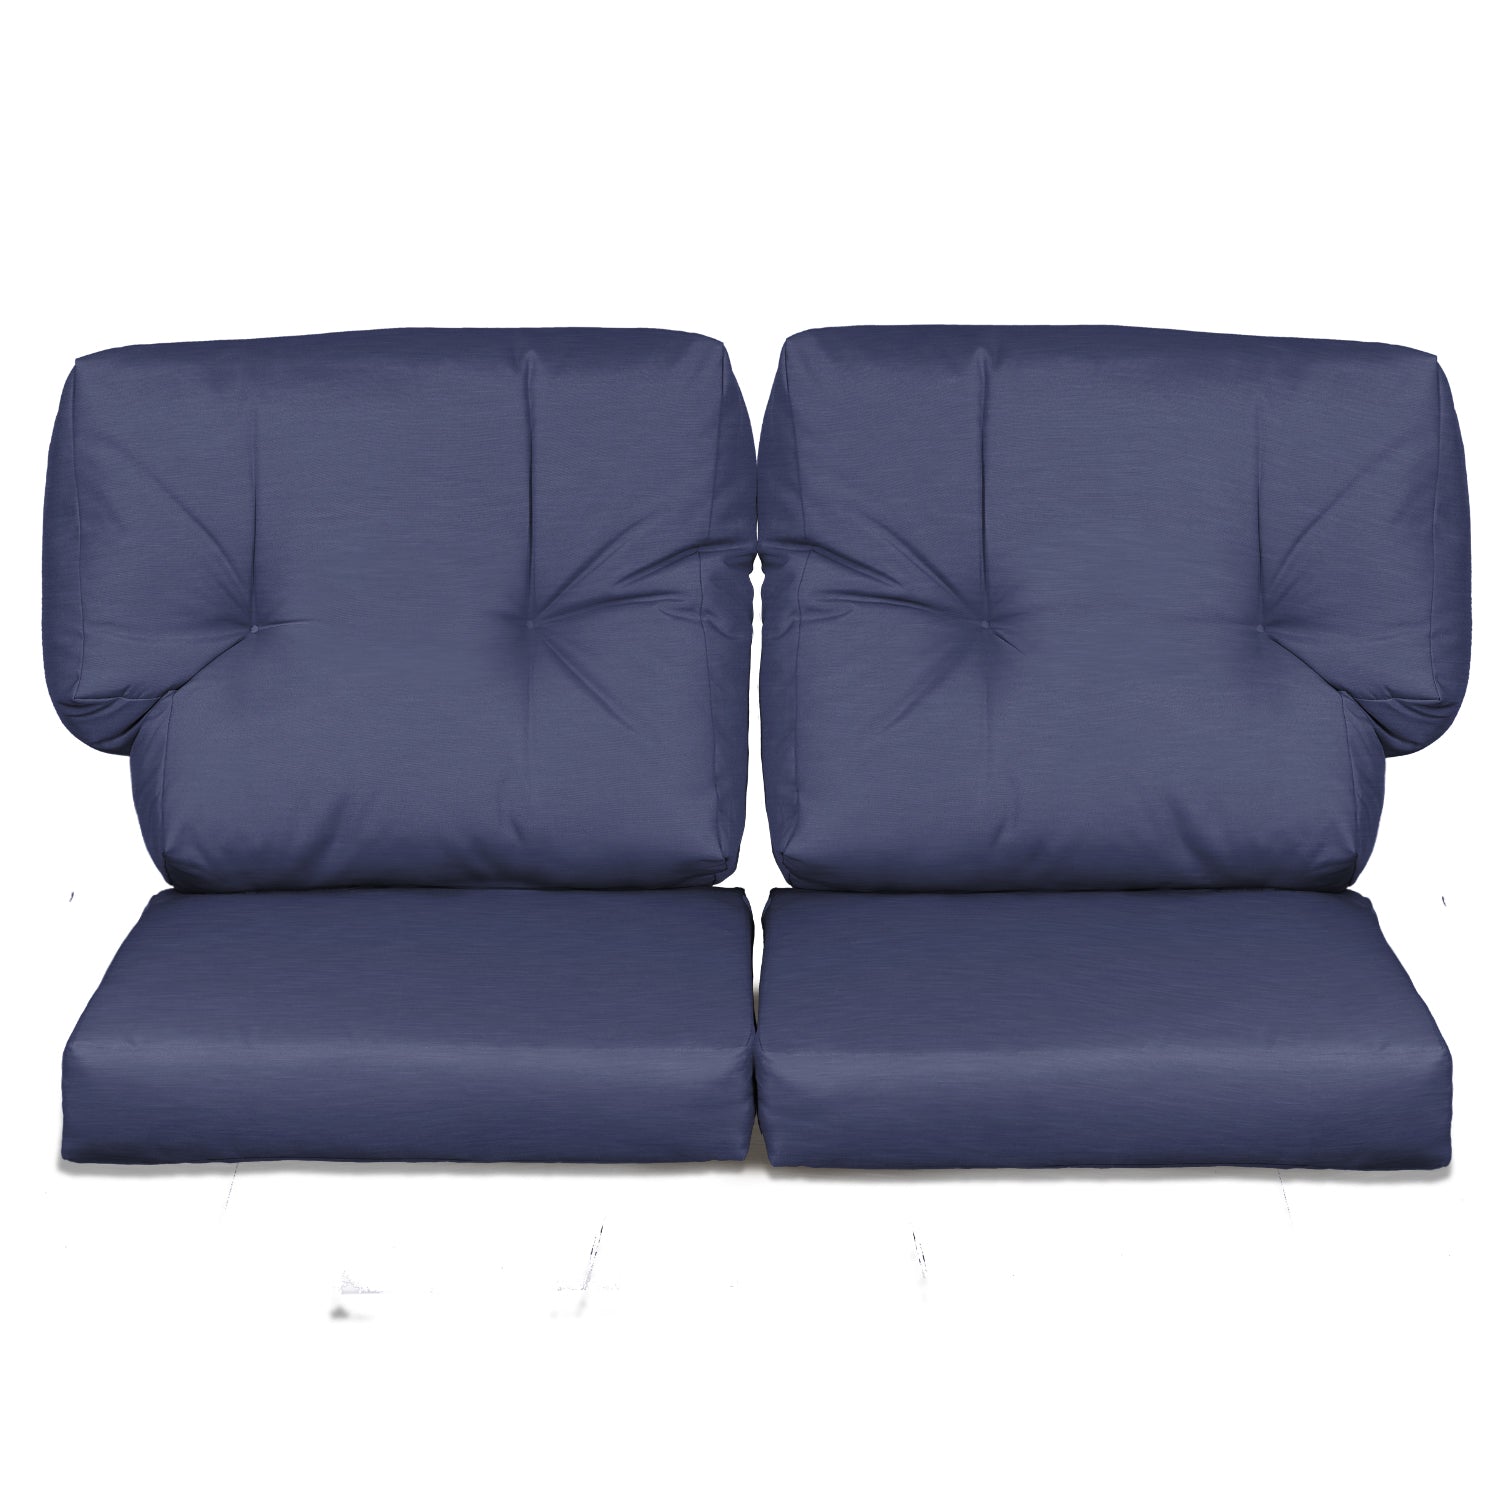 Deep Seating Loveseat Cushion Set, High-Quality Olefin Fabric, Breathable and Supportive- Set of 2 (2 Back, 2 Seater) CUSHION Aoodor LLC Dark Blue  